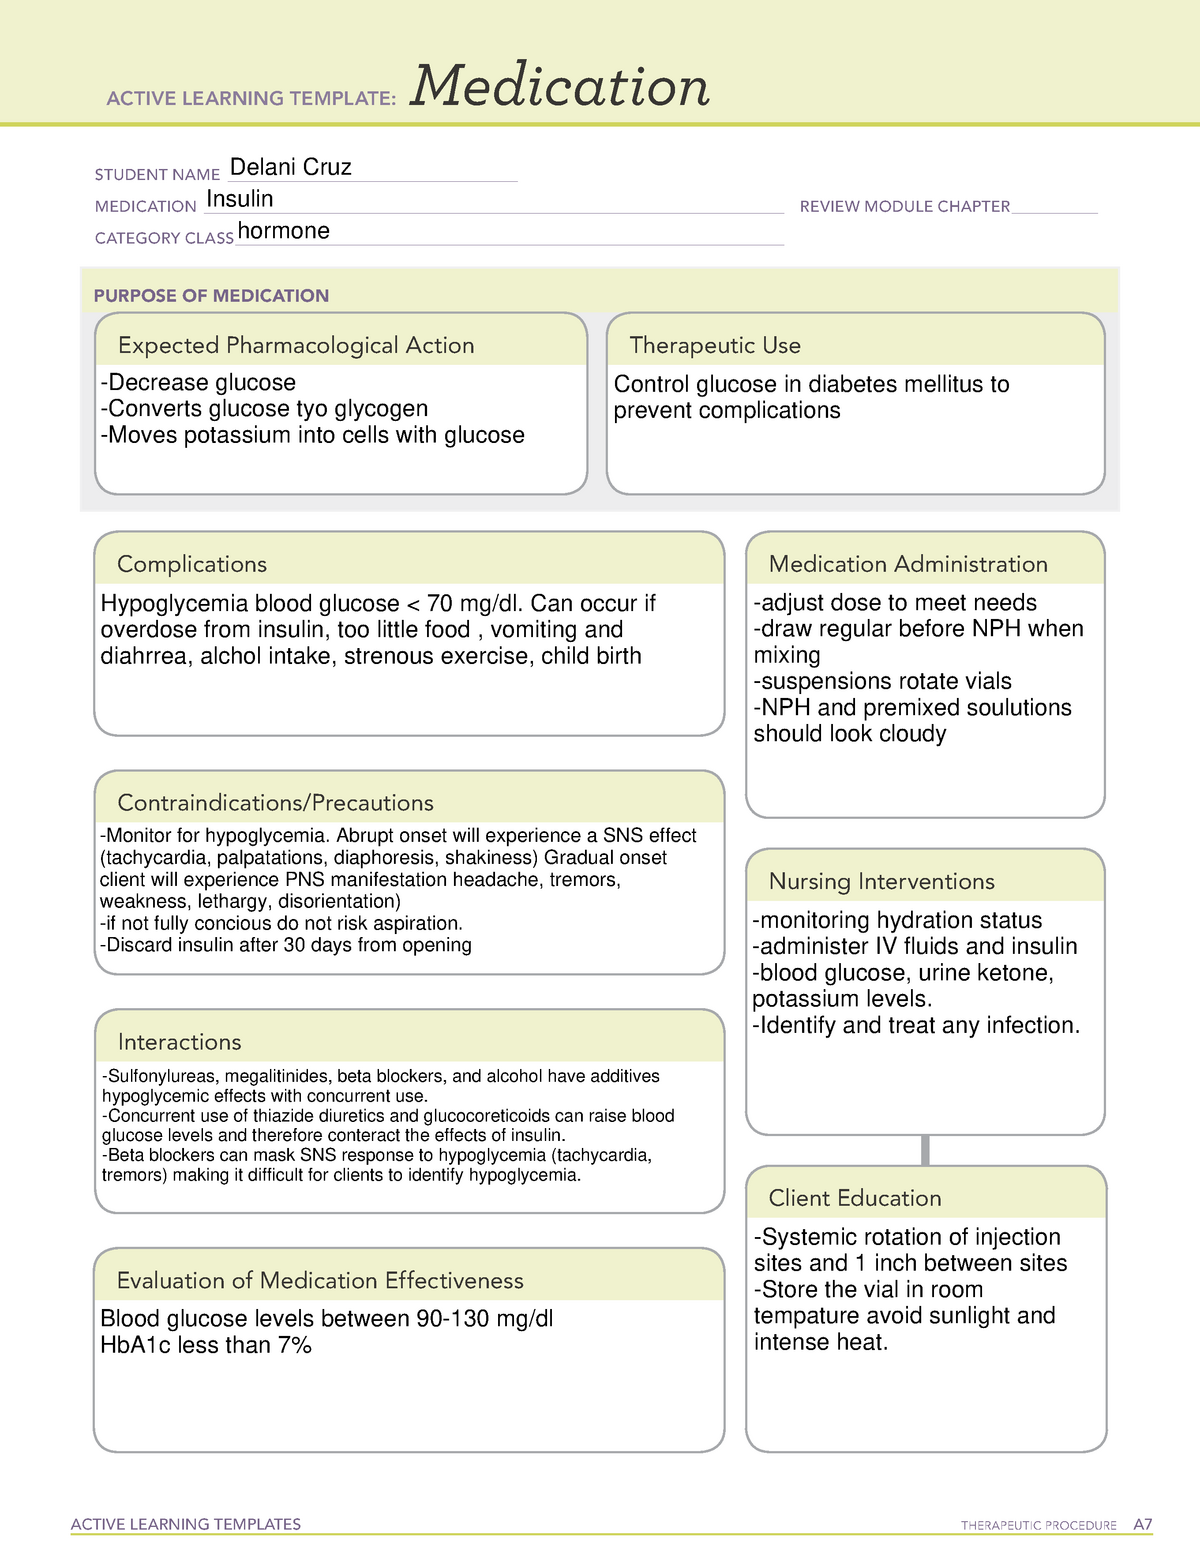 ati-template-insulin-active-learning-templates-therapeutic-procedure-a-medication-student-name